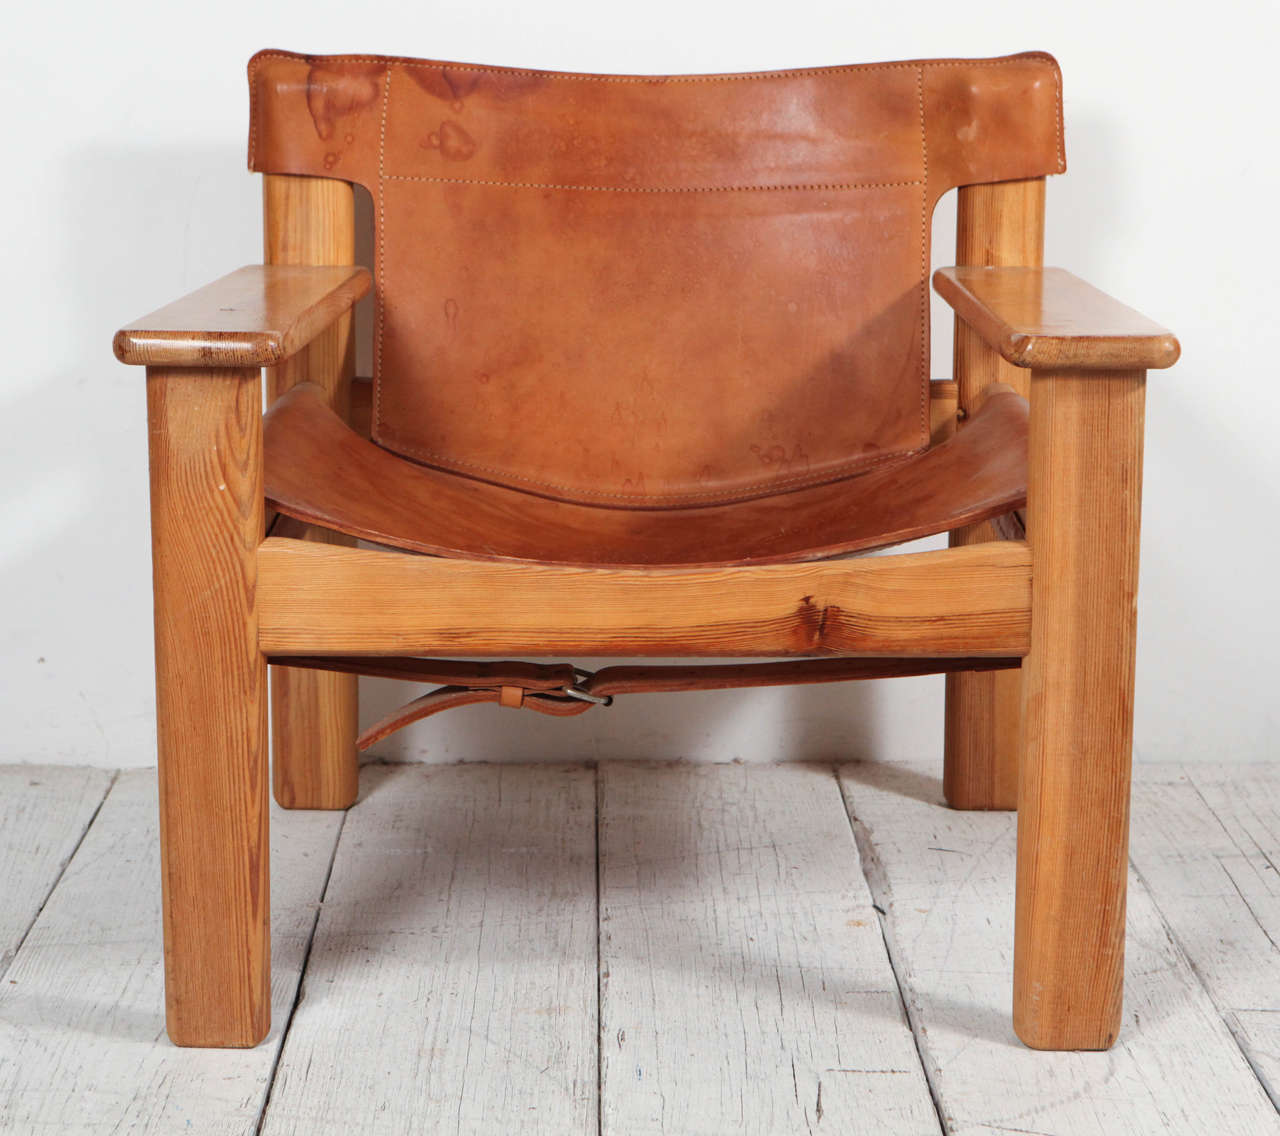 Saddle leather sling Spanish chair in the style of Børge Mogensen.